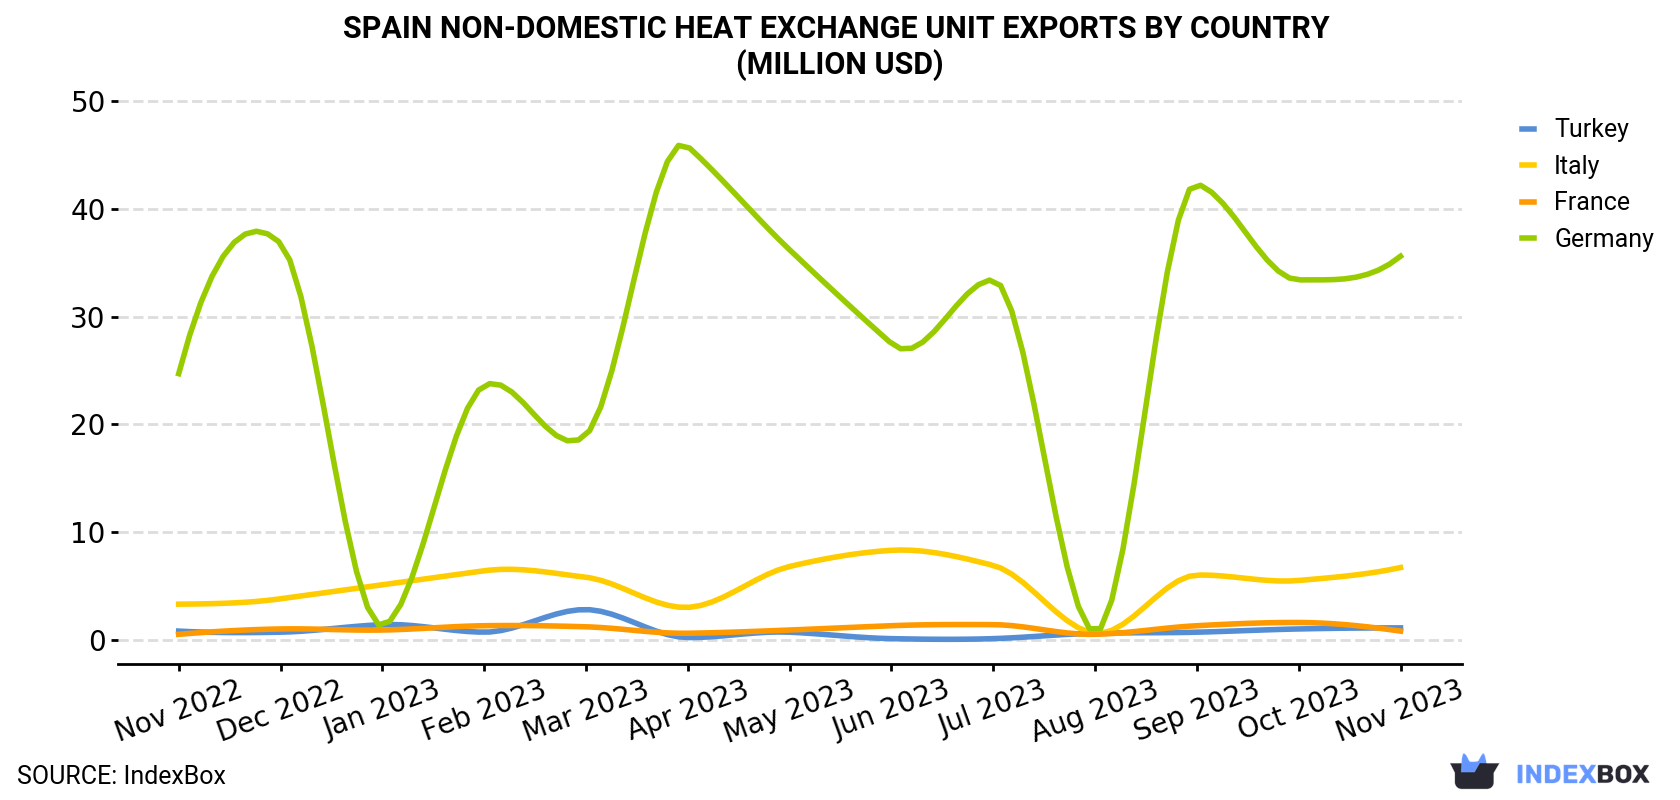 Spain Non-Domestic Heat Exchange Unit Exports By Country (Million USD)